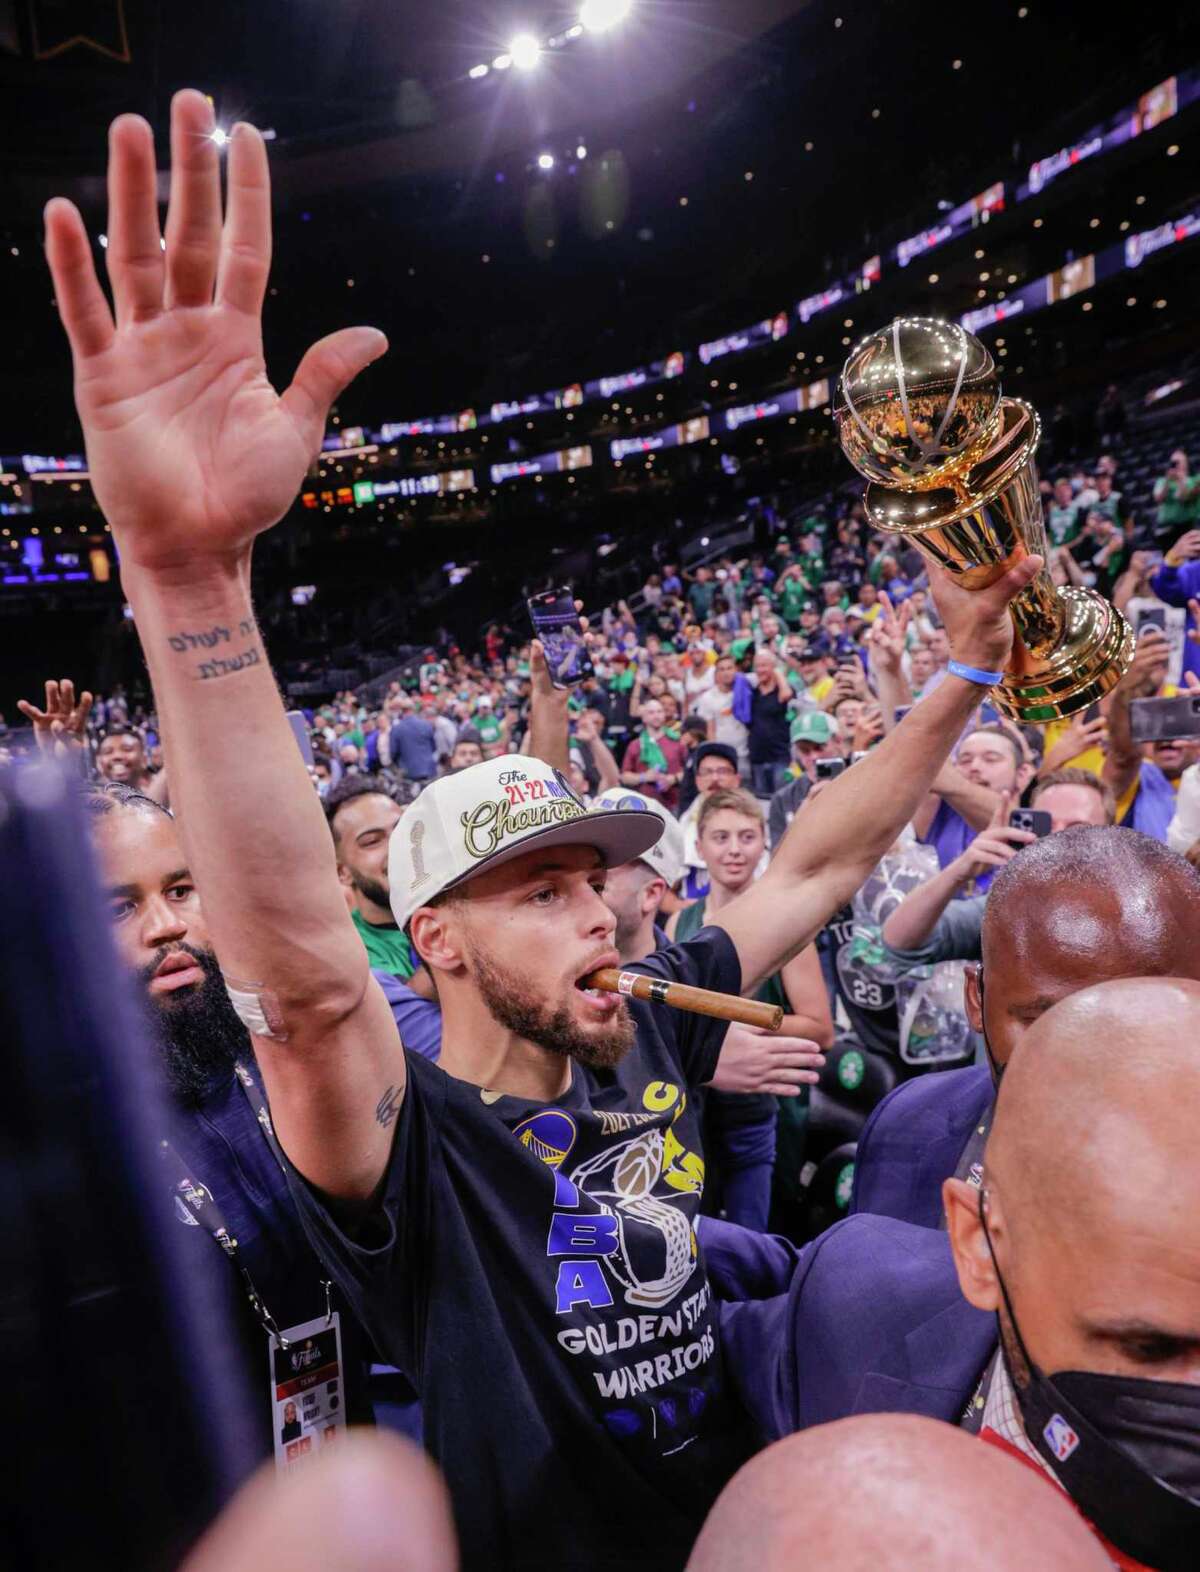 Steph Curry wins 2022 Finals MVP - Golden State Of Mind